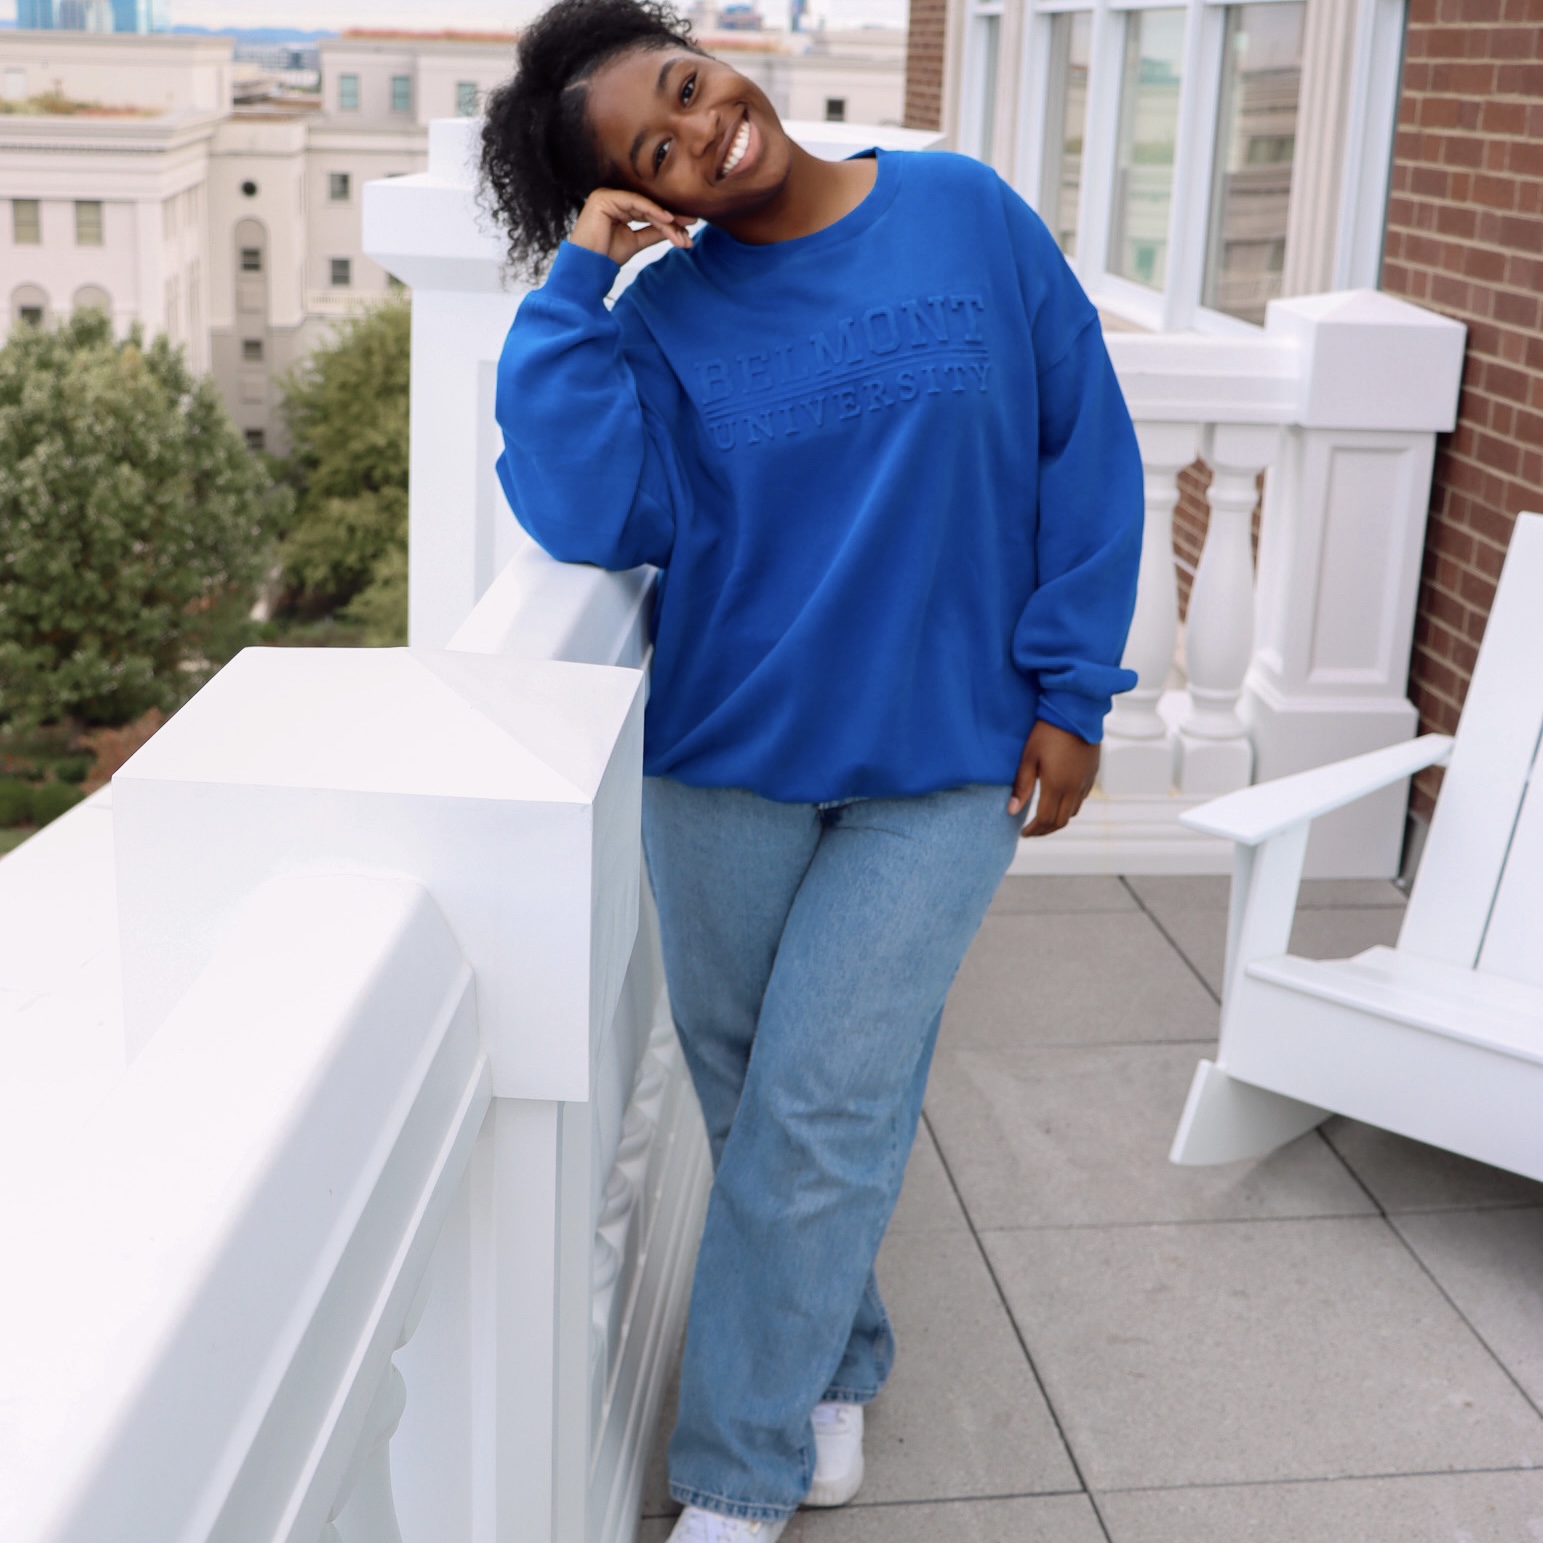 Female Belmont student leaning on a white rail modeling a royal blue Belmont crewneck. Click here to view on Instagram. 